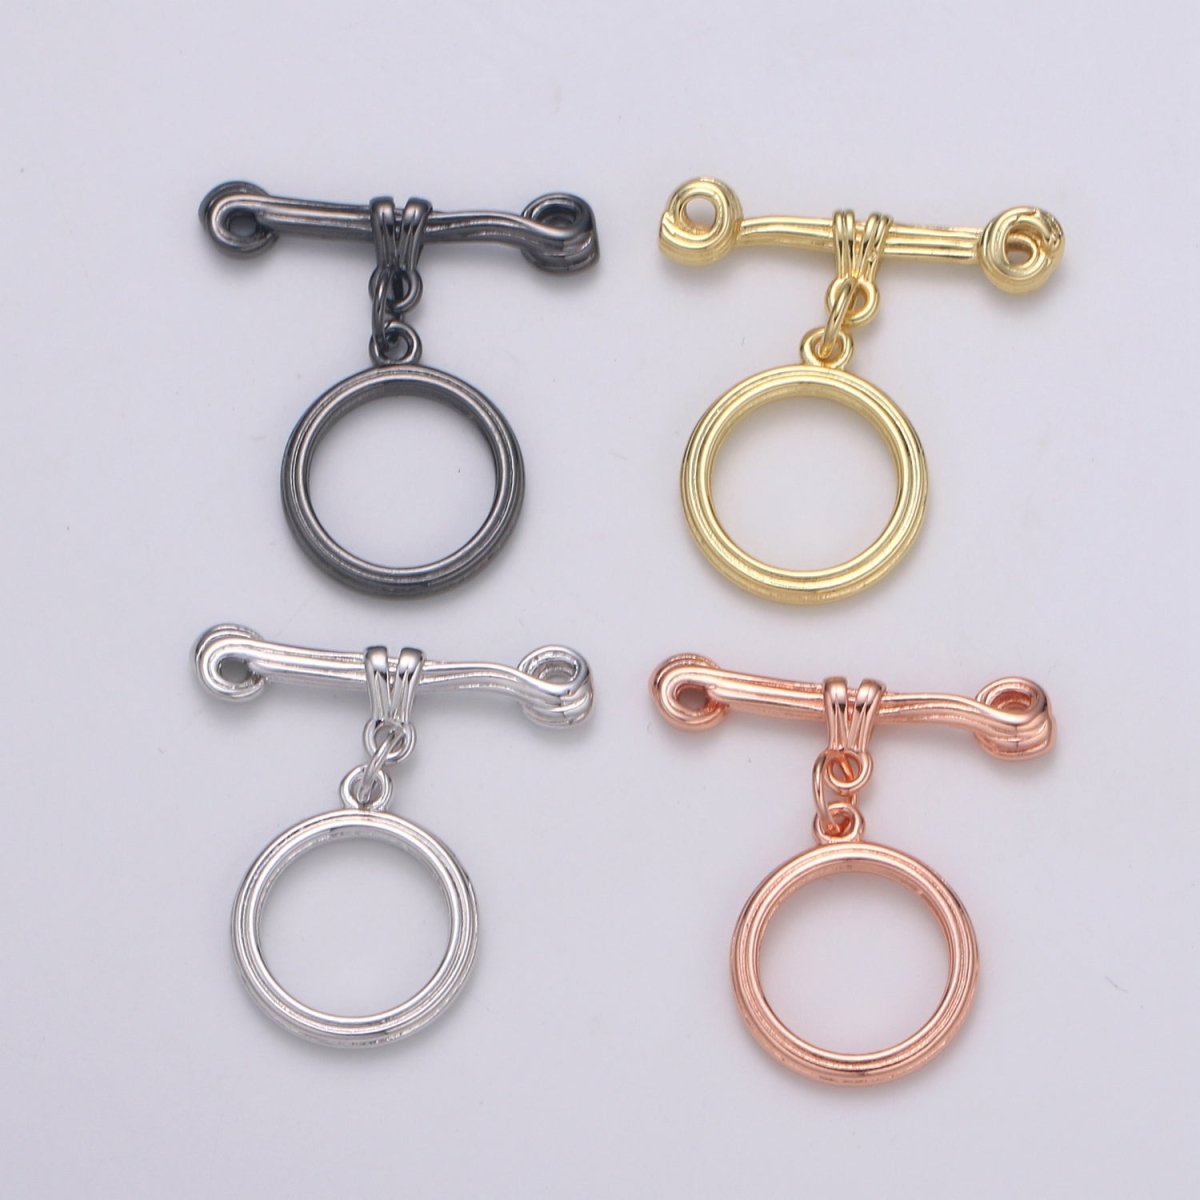 Both sided design Gold Toggle Clasp with jump ring chose color-Gold, Rose Gold Black, Silver OT Clasp for Jewelry Making Supply L-216~L-219 - DLUXCA